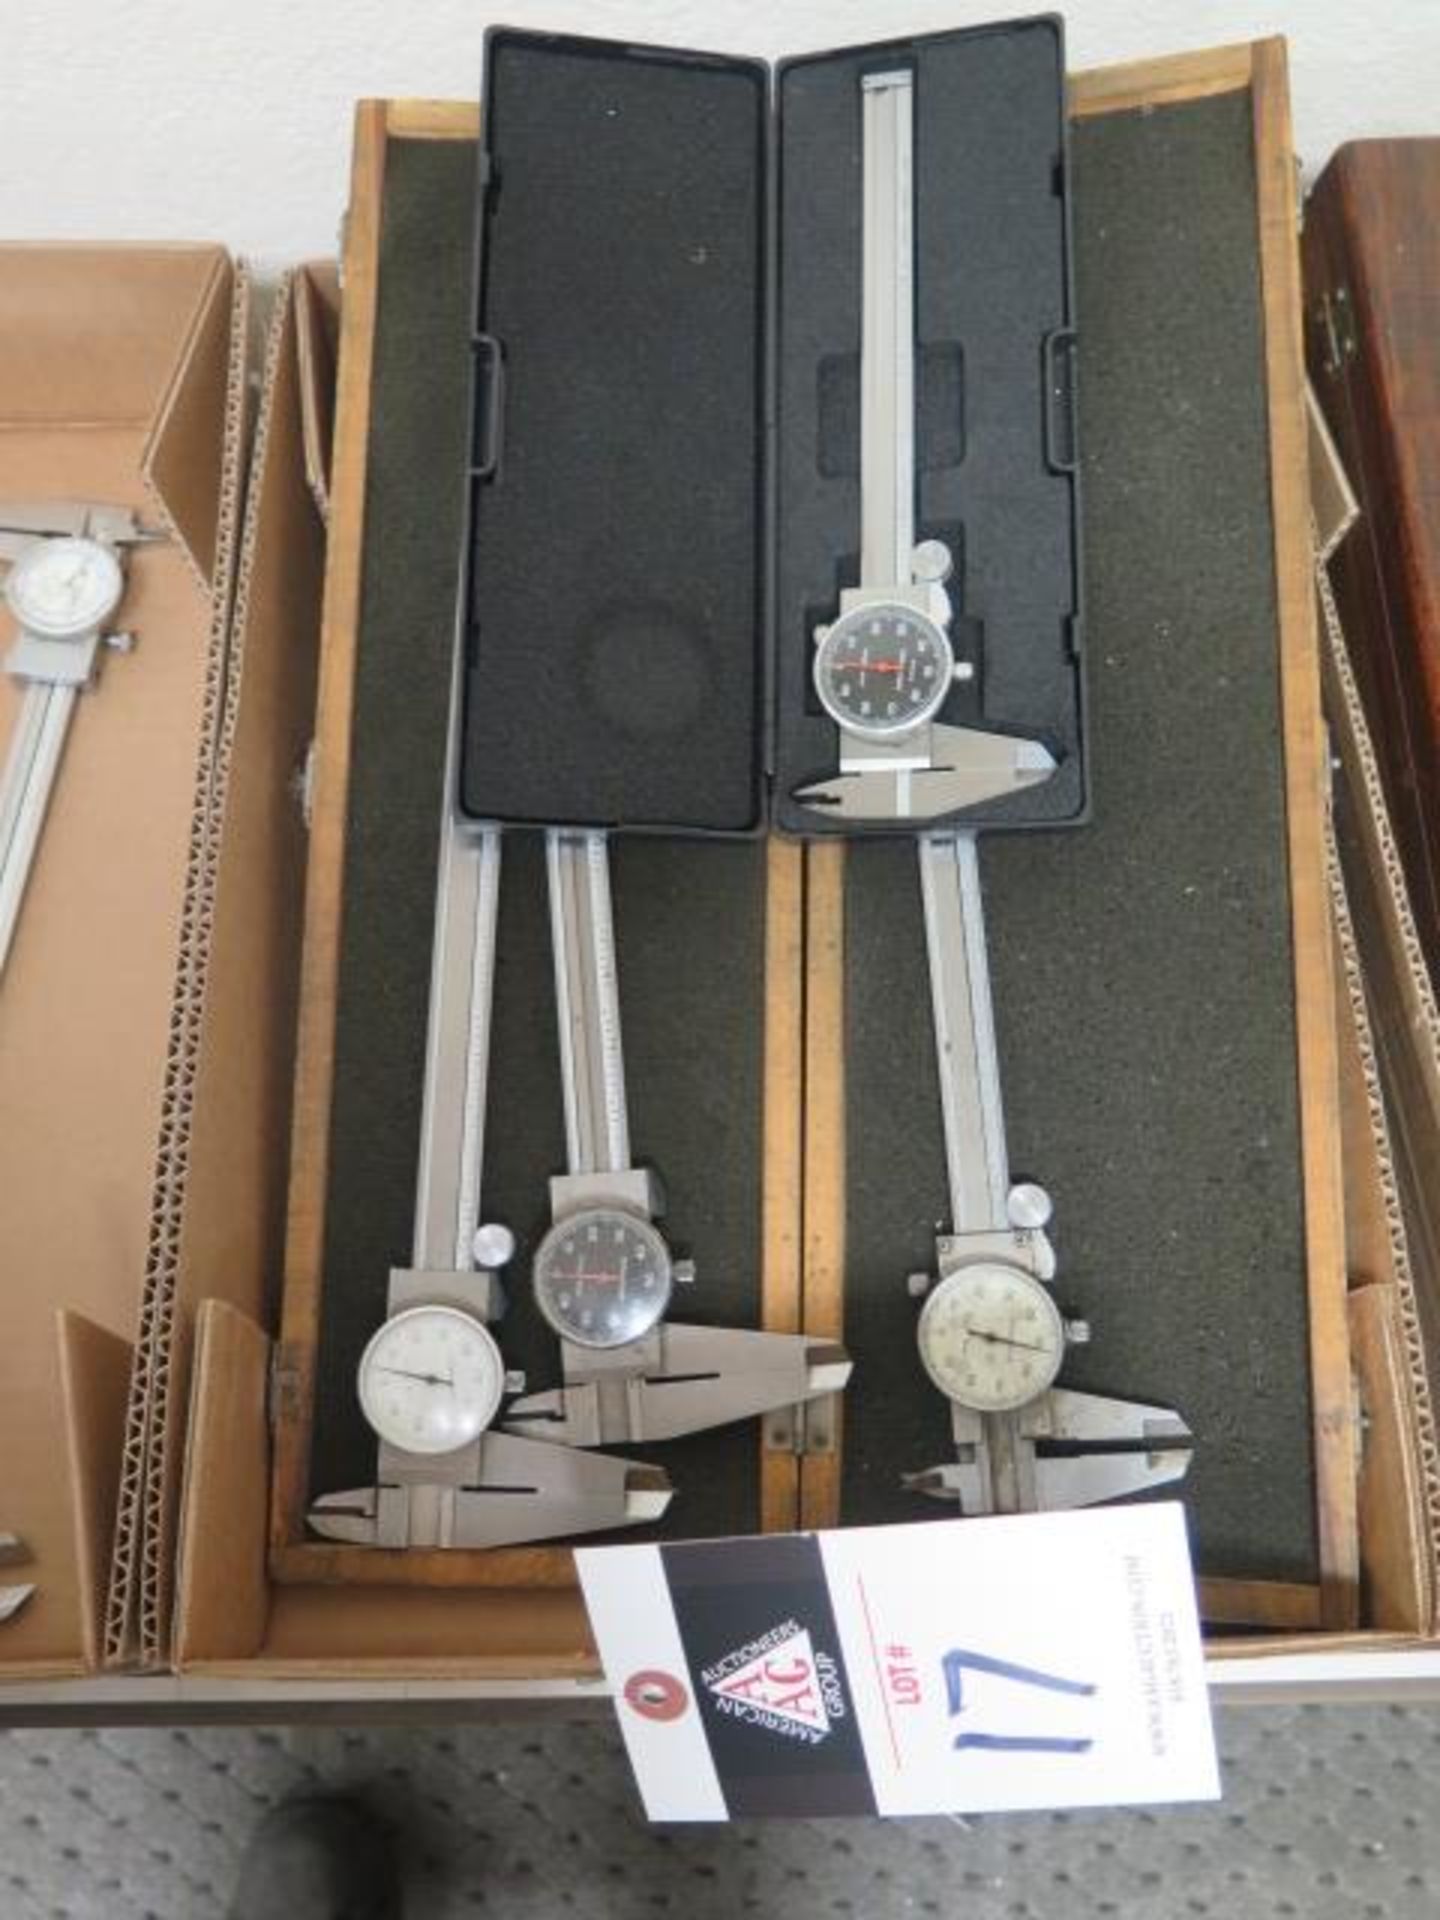 6" and 12" Dial Calipers (4) (SOLD AS-IS - NO WARRANTY)